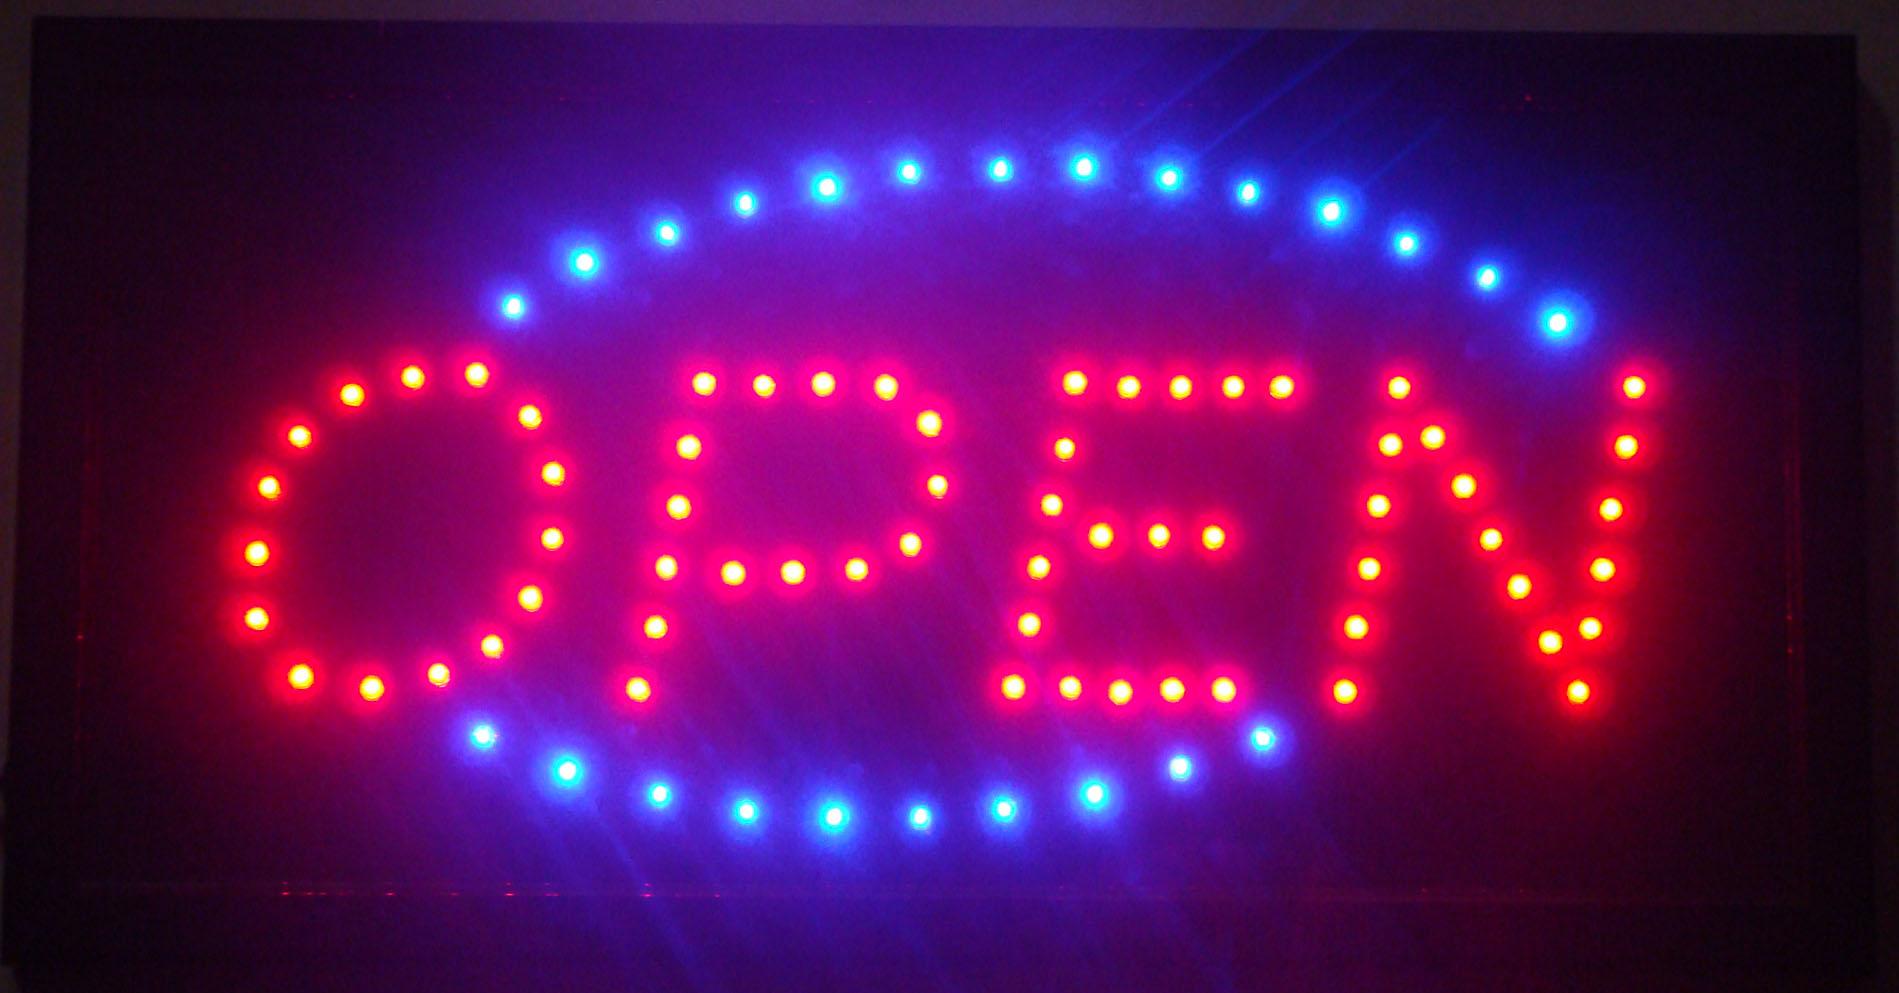 Wholesale Cheap Price Led Open Business Sign With a Chain 19 x 10 Inch